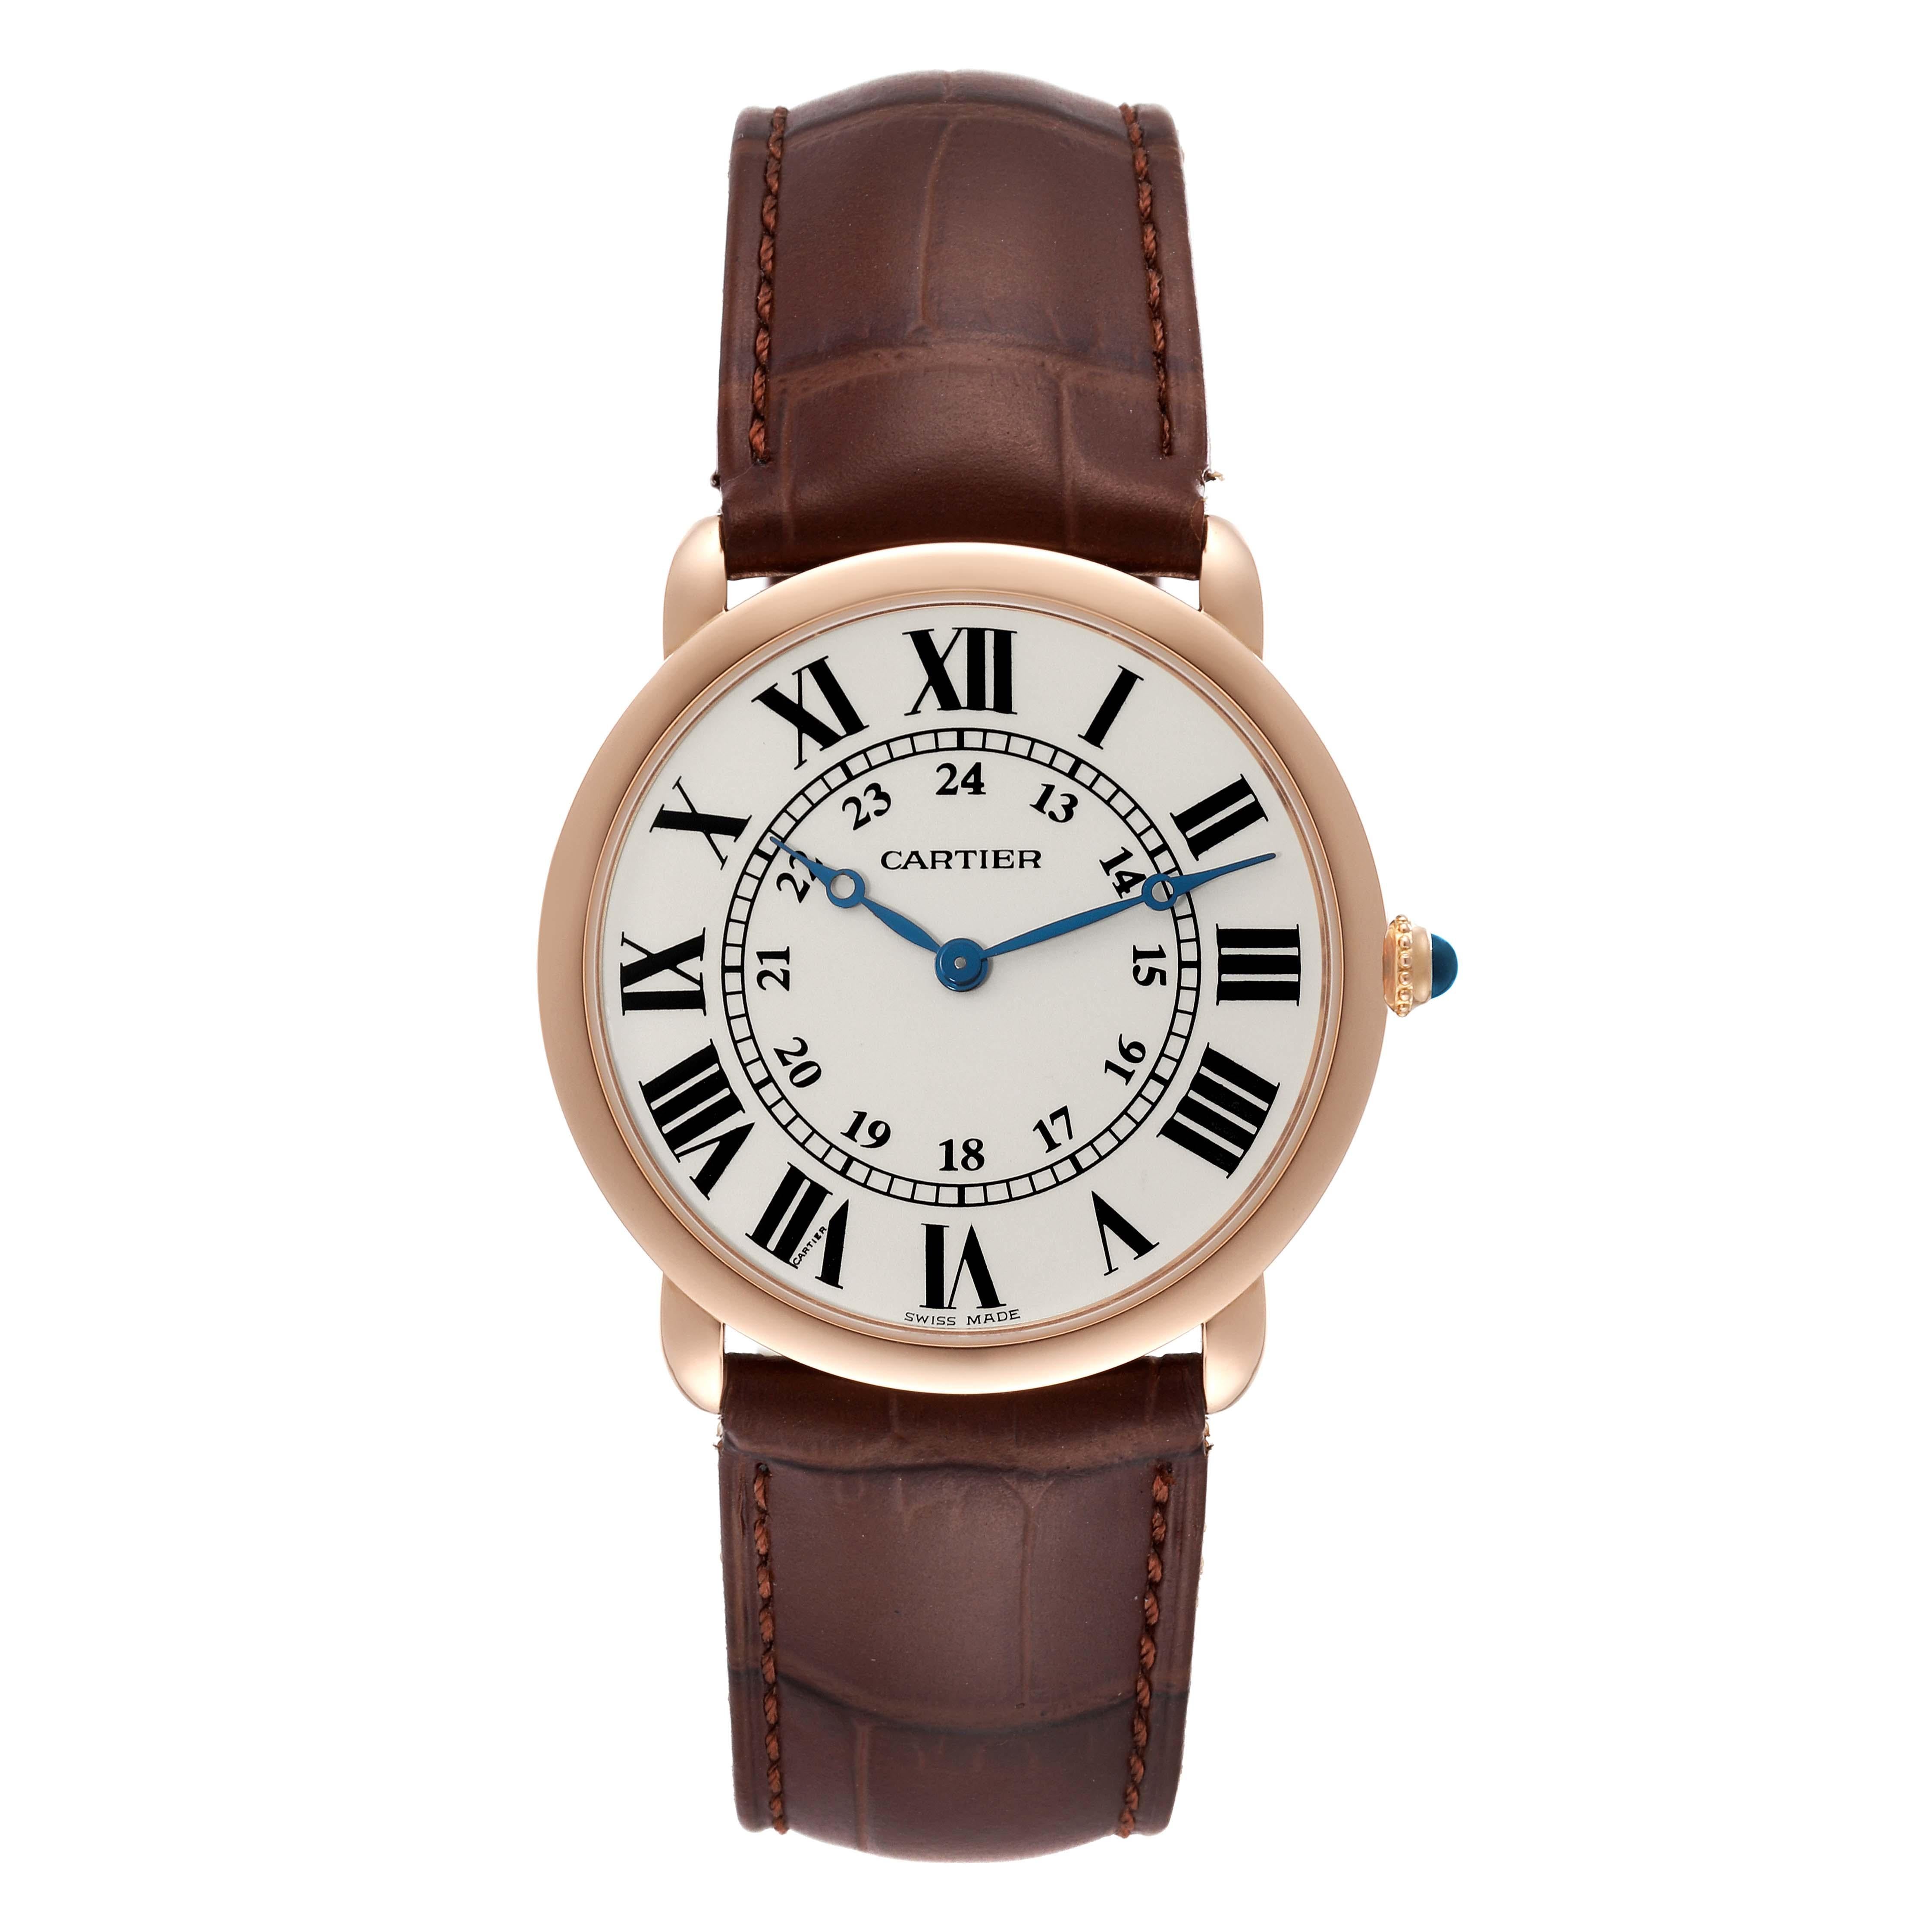 Cartier Ronde Louis Rose Gold Silver Dial Mens Watch W6800251. Manual winding movement. 18k rose gold case 36.0 mm in diameter. Exhibition transparent sapphire crystal caseback. Circular grained crown set with a blue sapphire cabochon. . Scratch